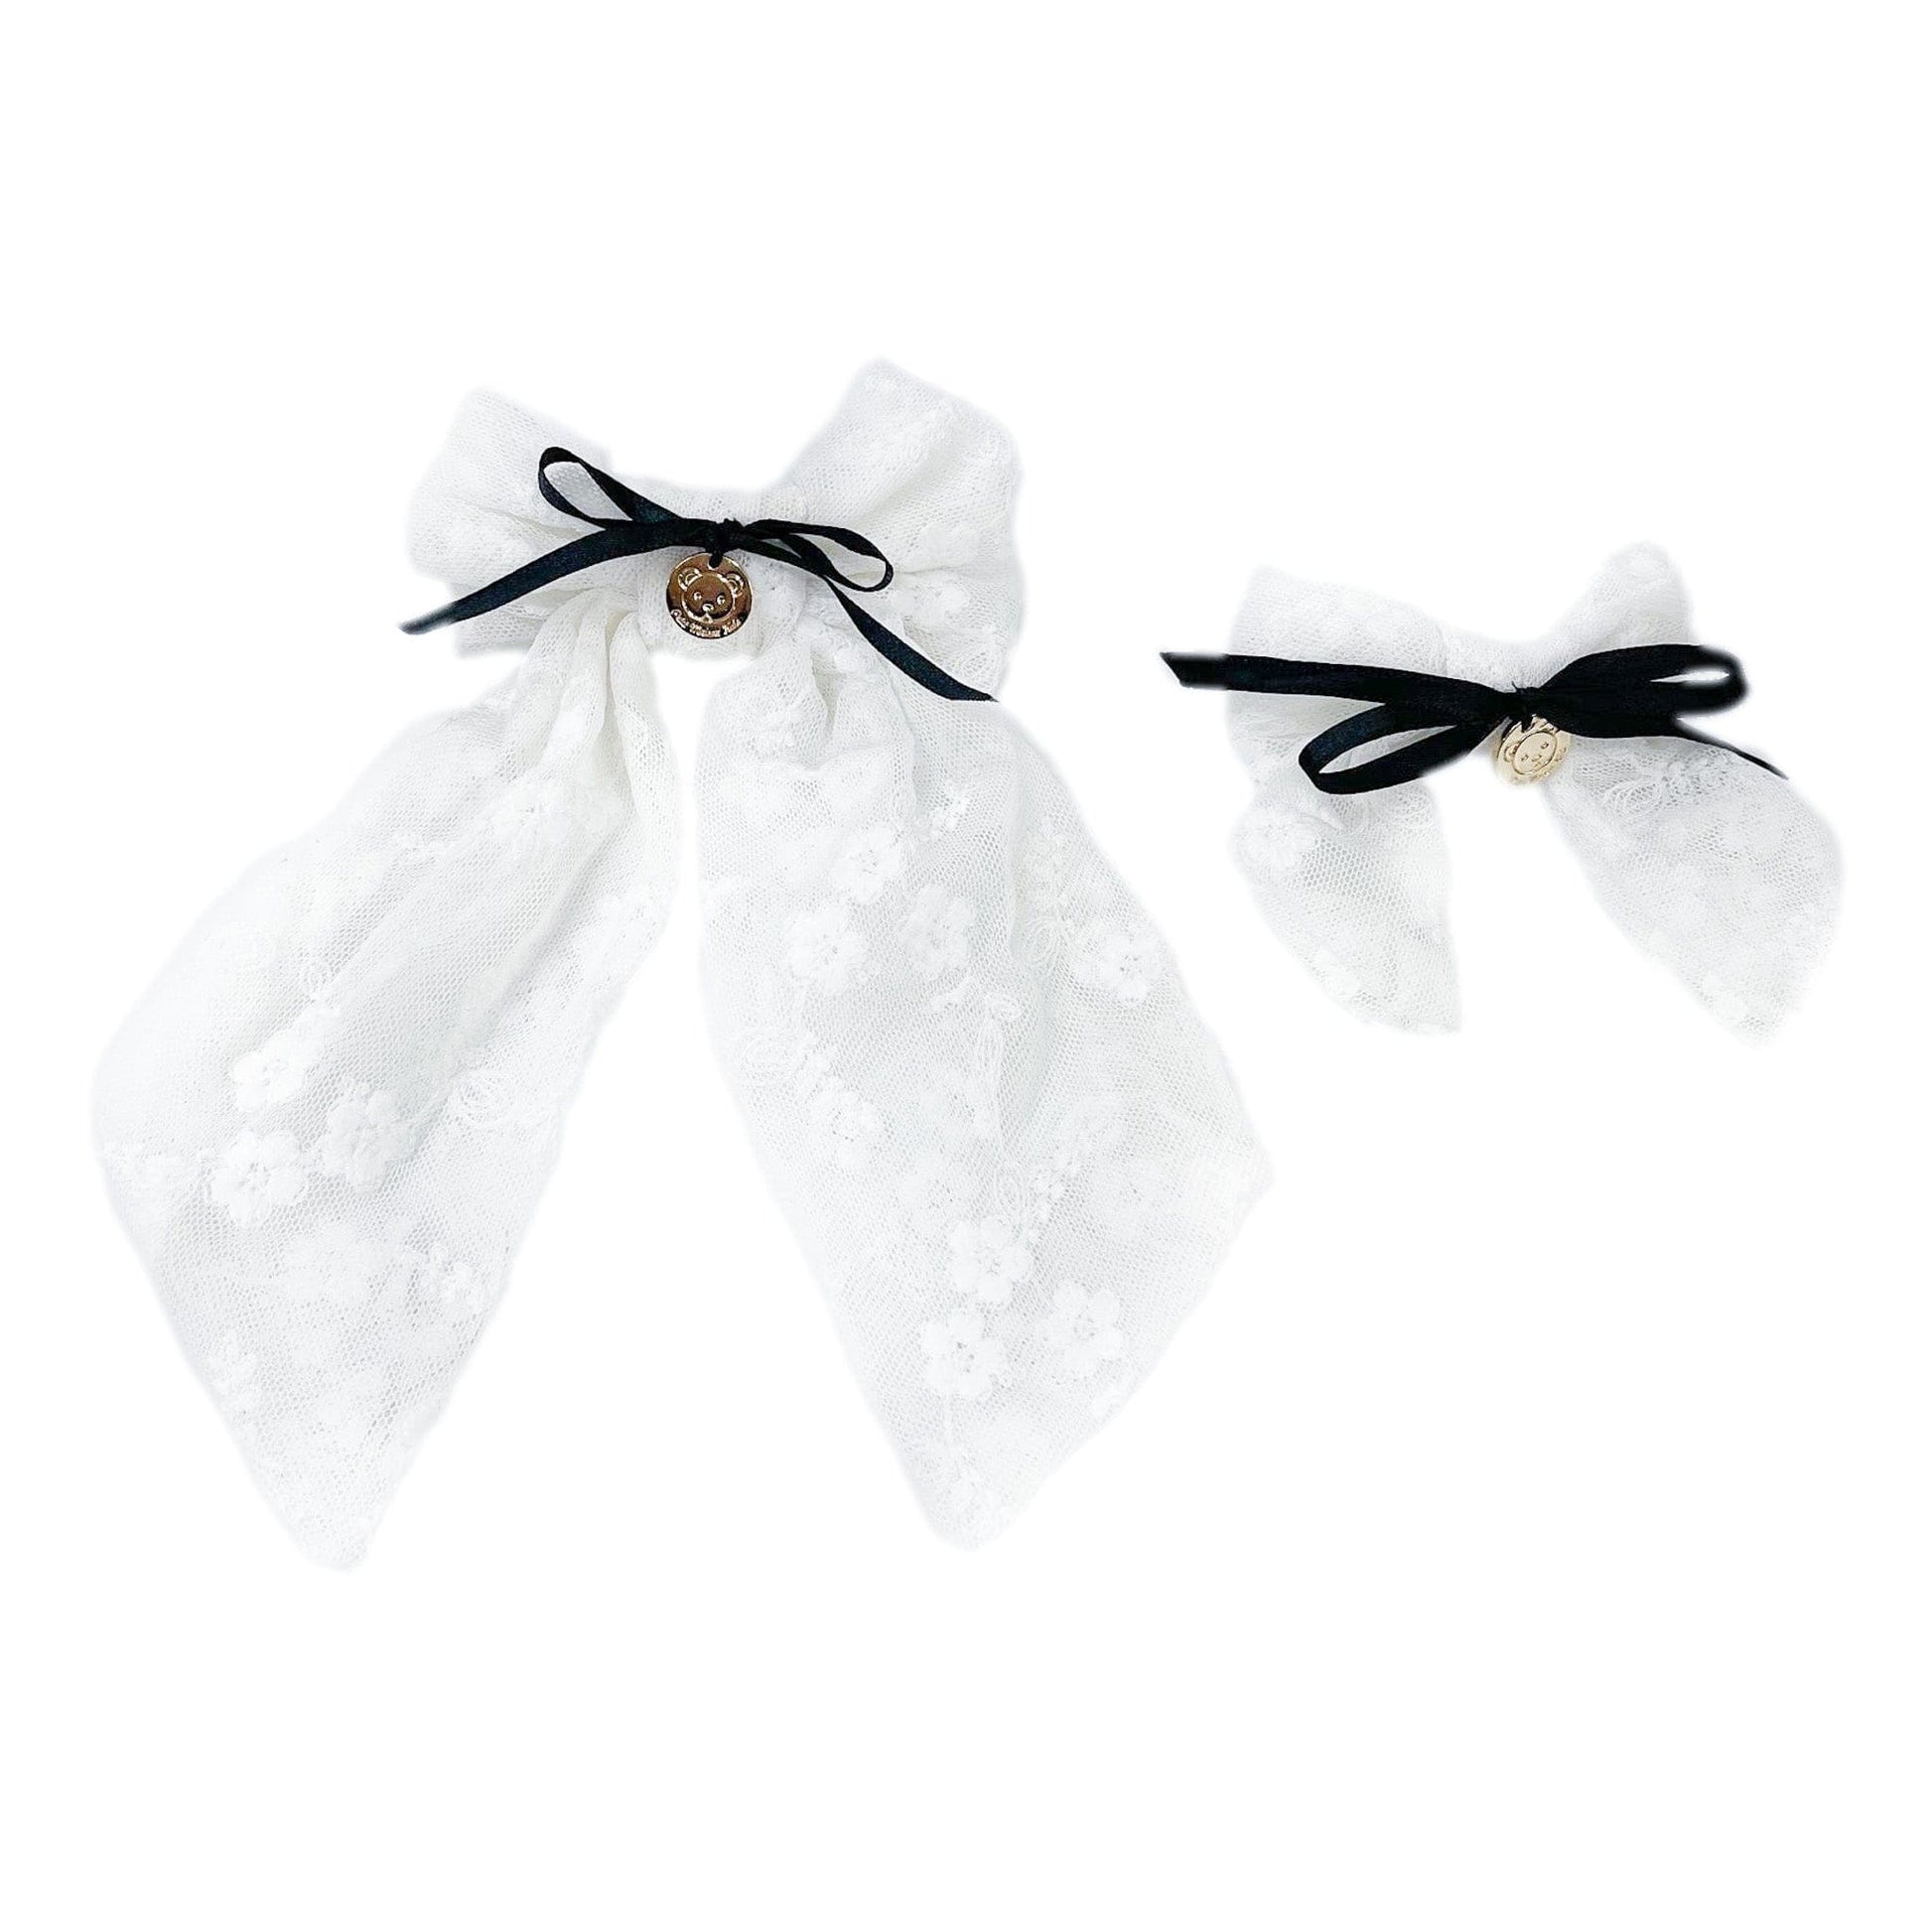 Embroidered Flower Hair Bows - Petite Maison Kids